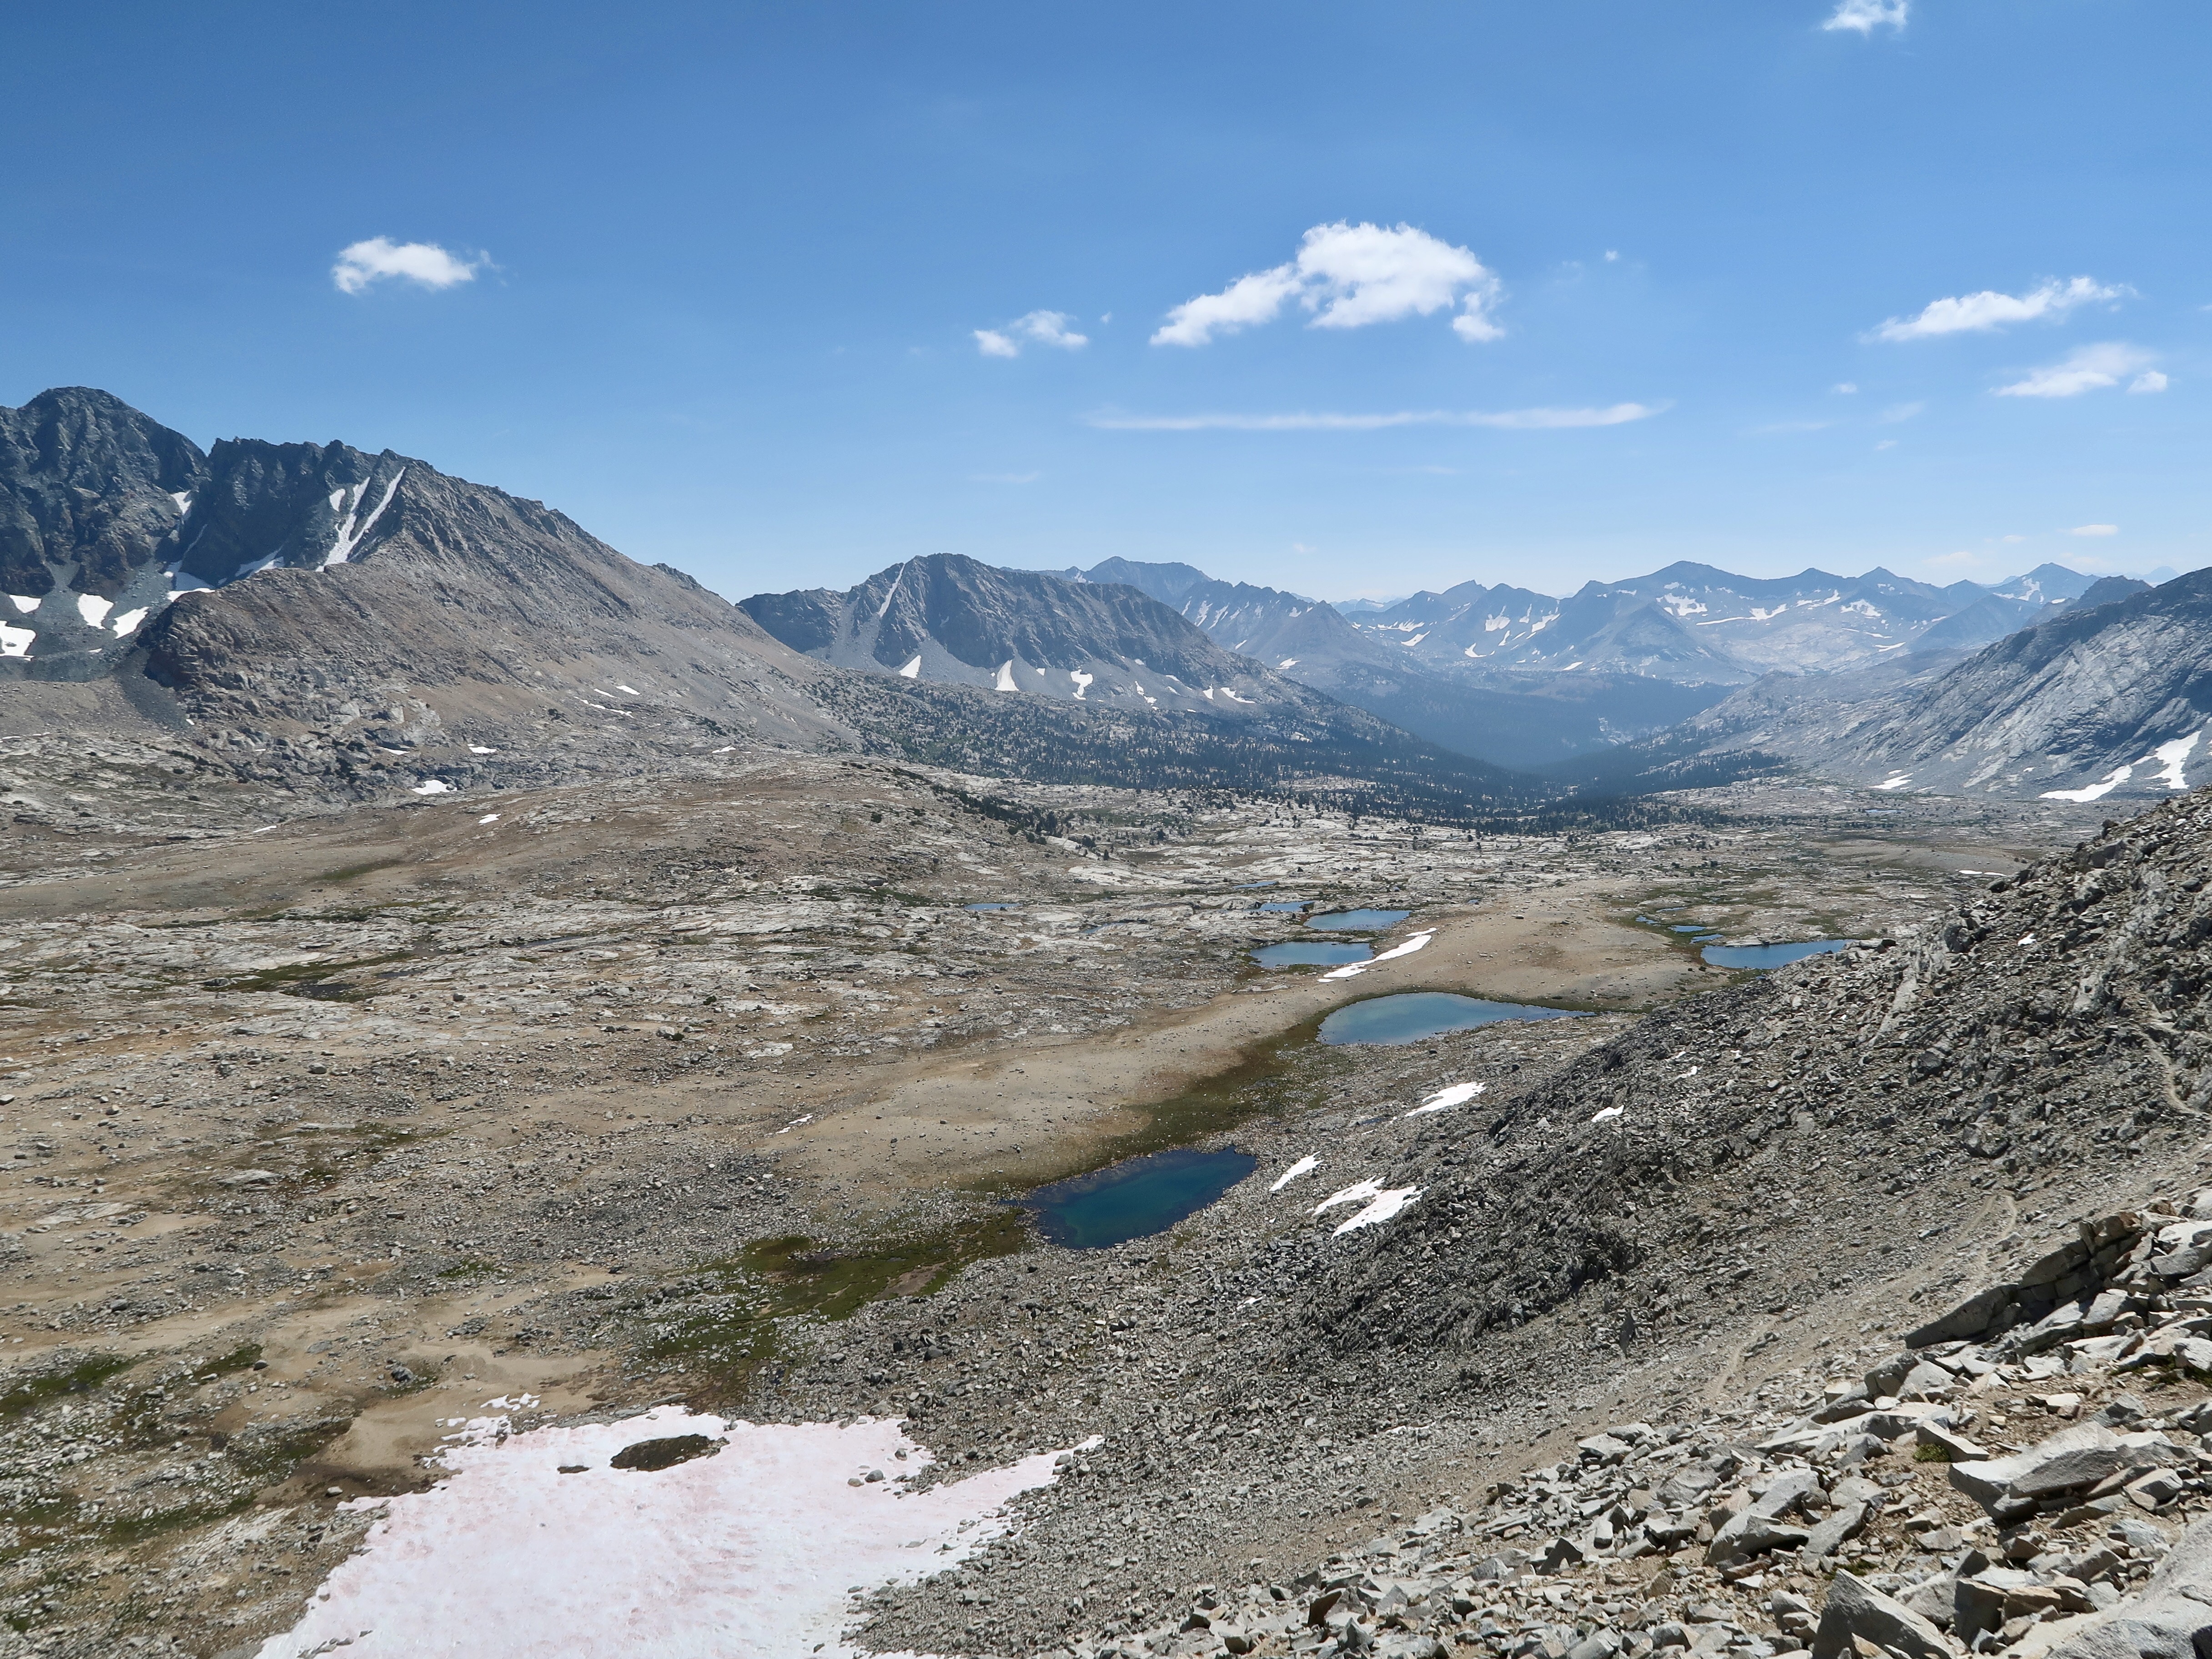 PCT Day 157 – Mather Pass and the Golden Staircase